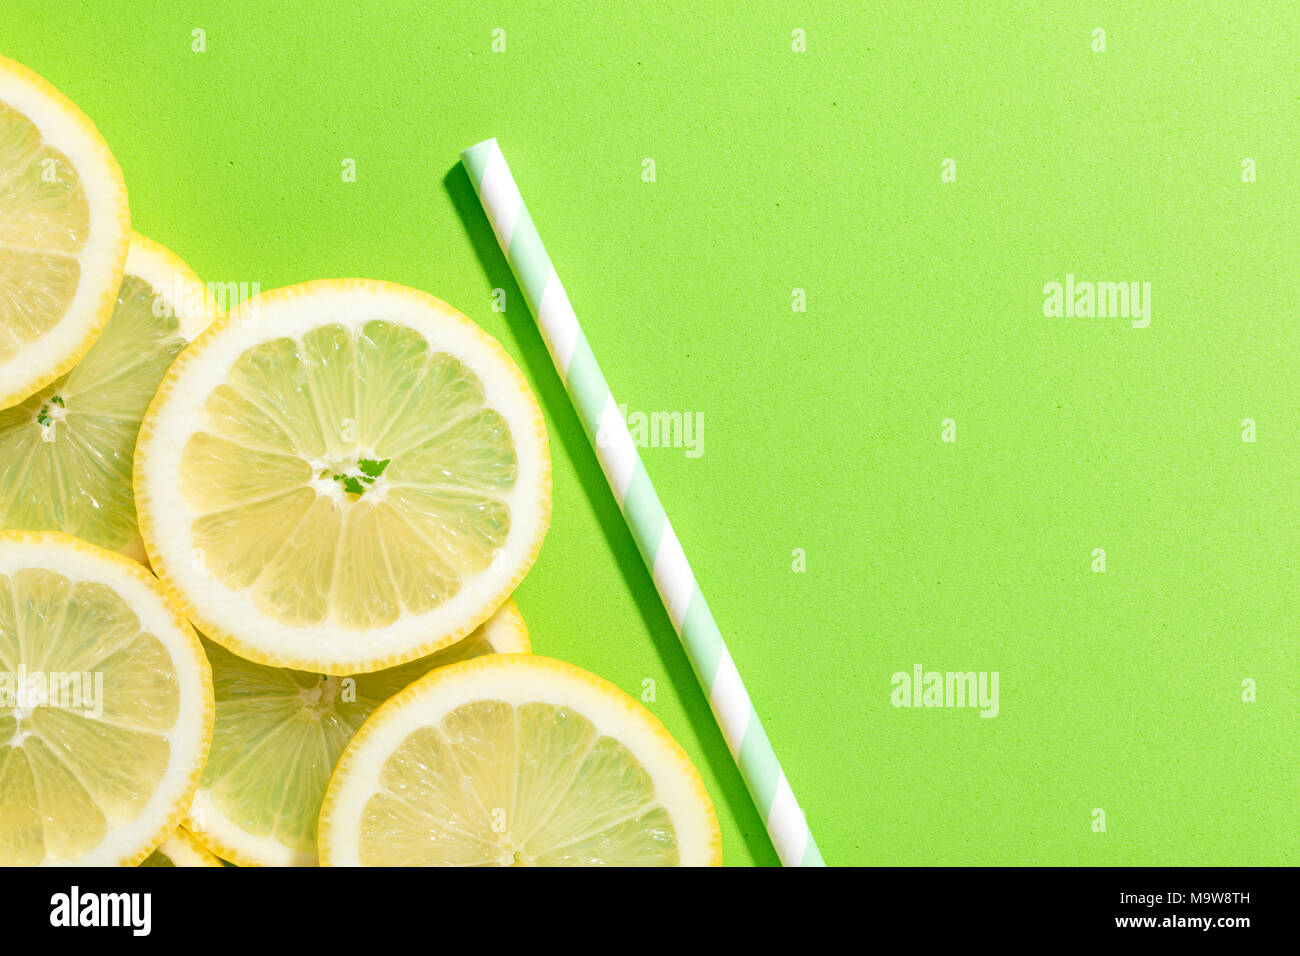 slices of lemon on green colored background with an striped straw Stock Photo